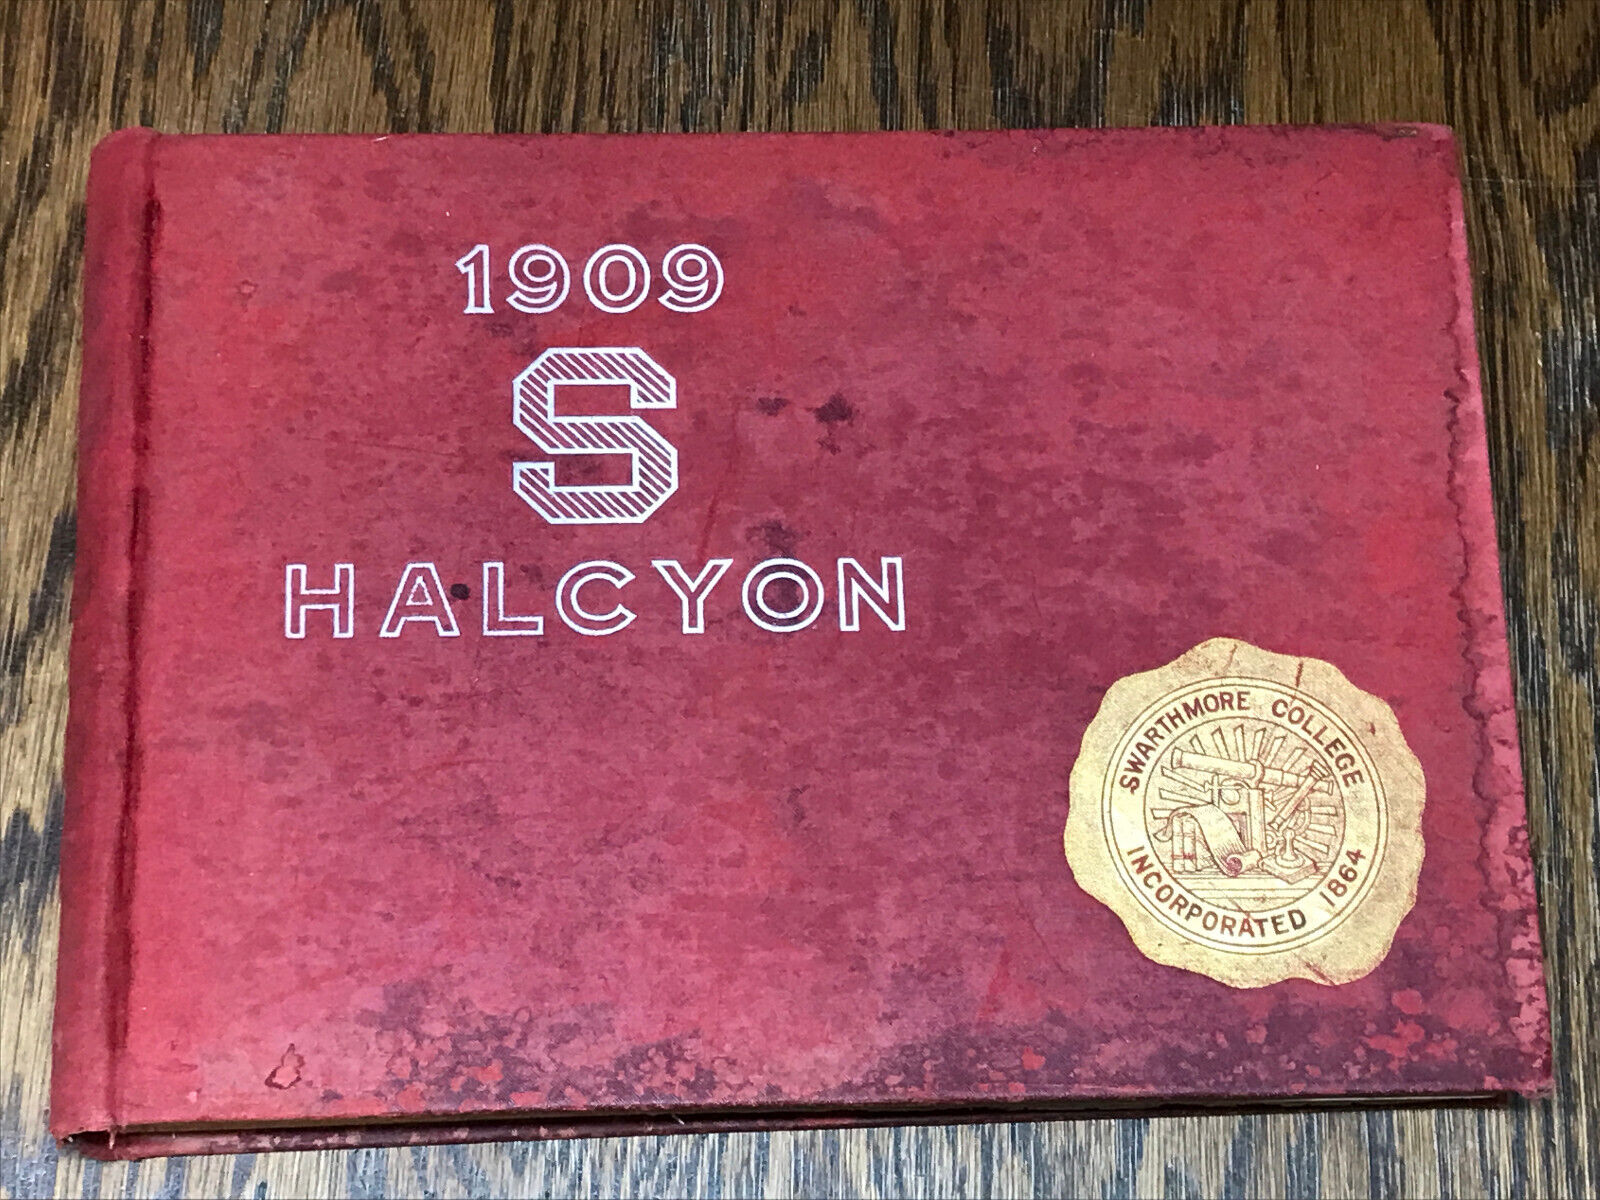 The Halcyon 1909 Swarthmore College Yearbook, Societies, Clubs, Fraternities Ads